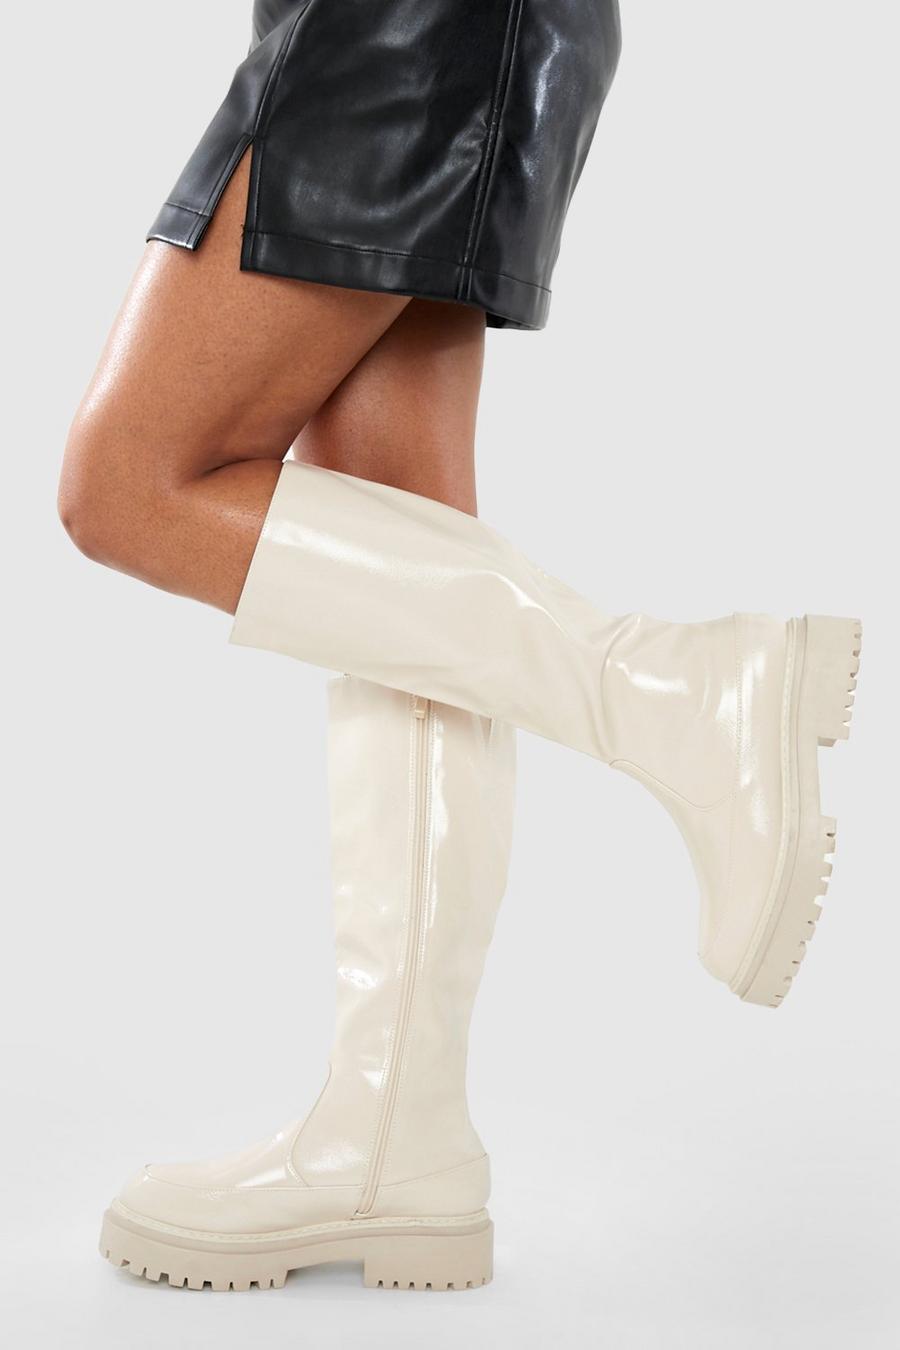 Cream white Wide Width Double Sole Knee High Boots